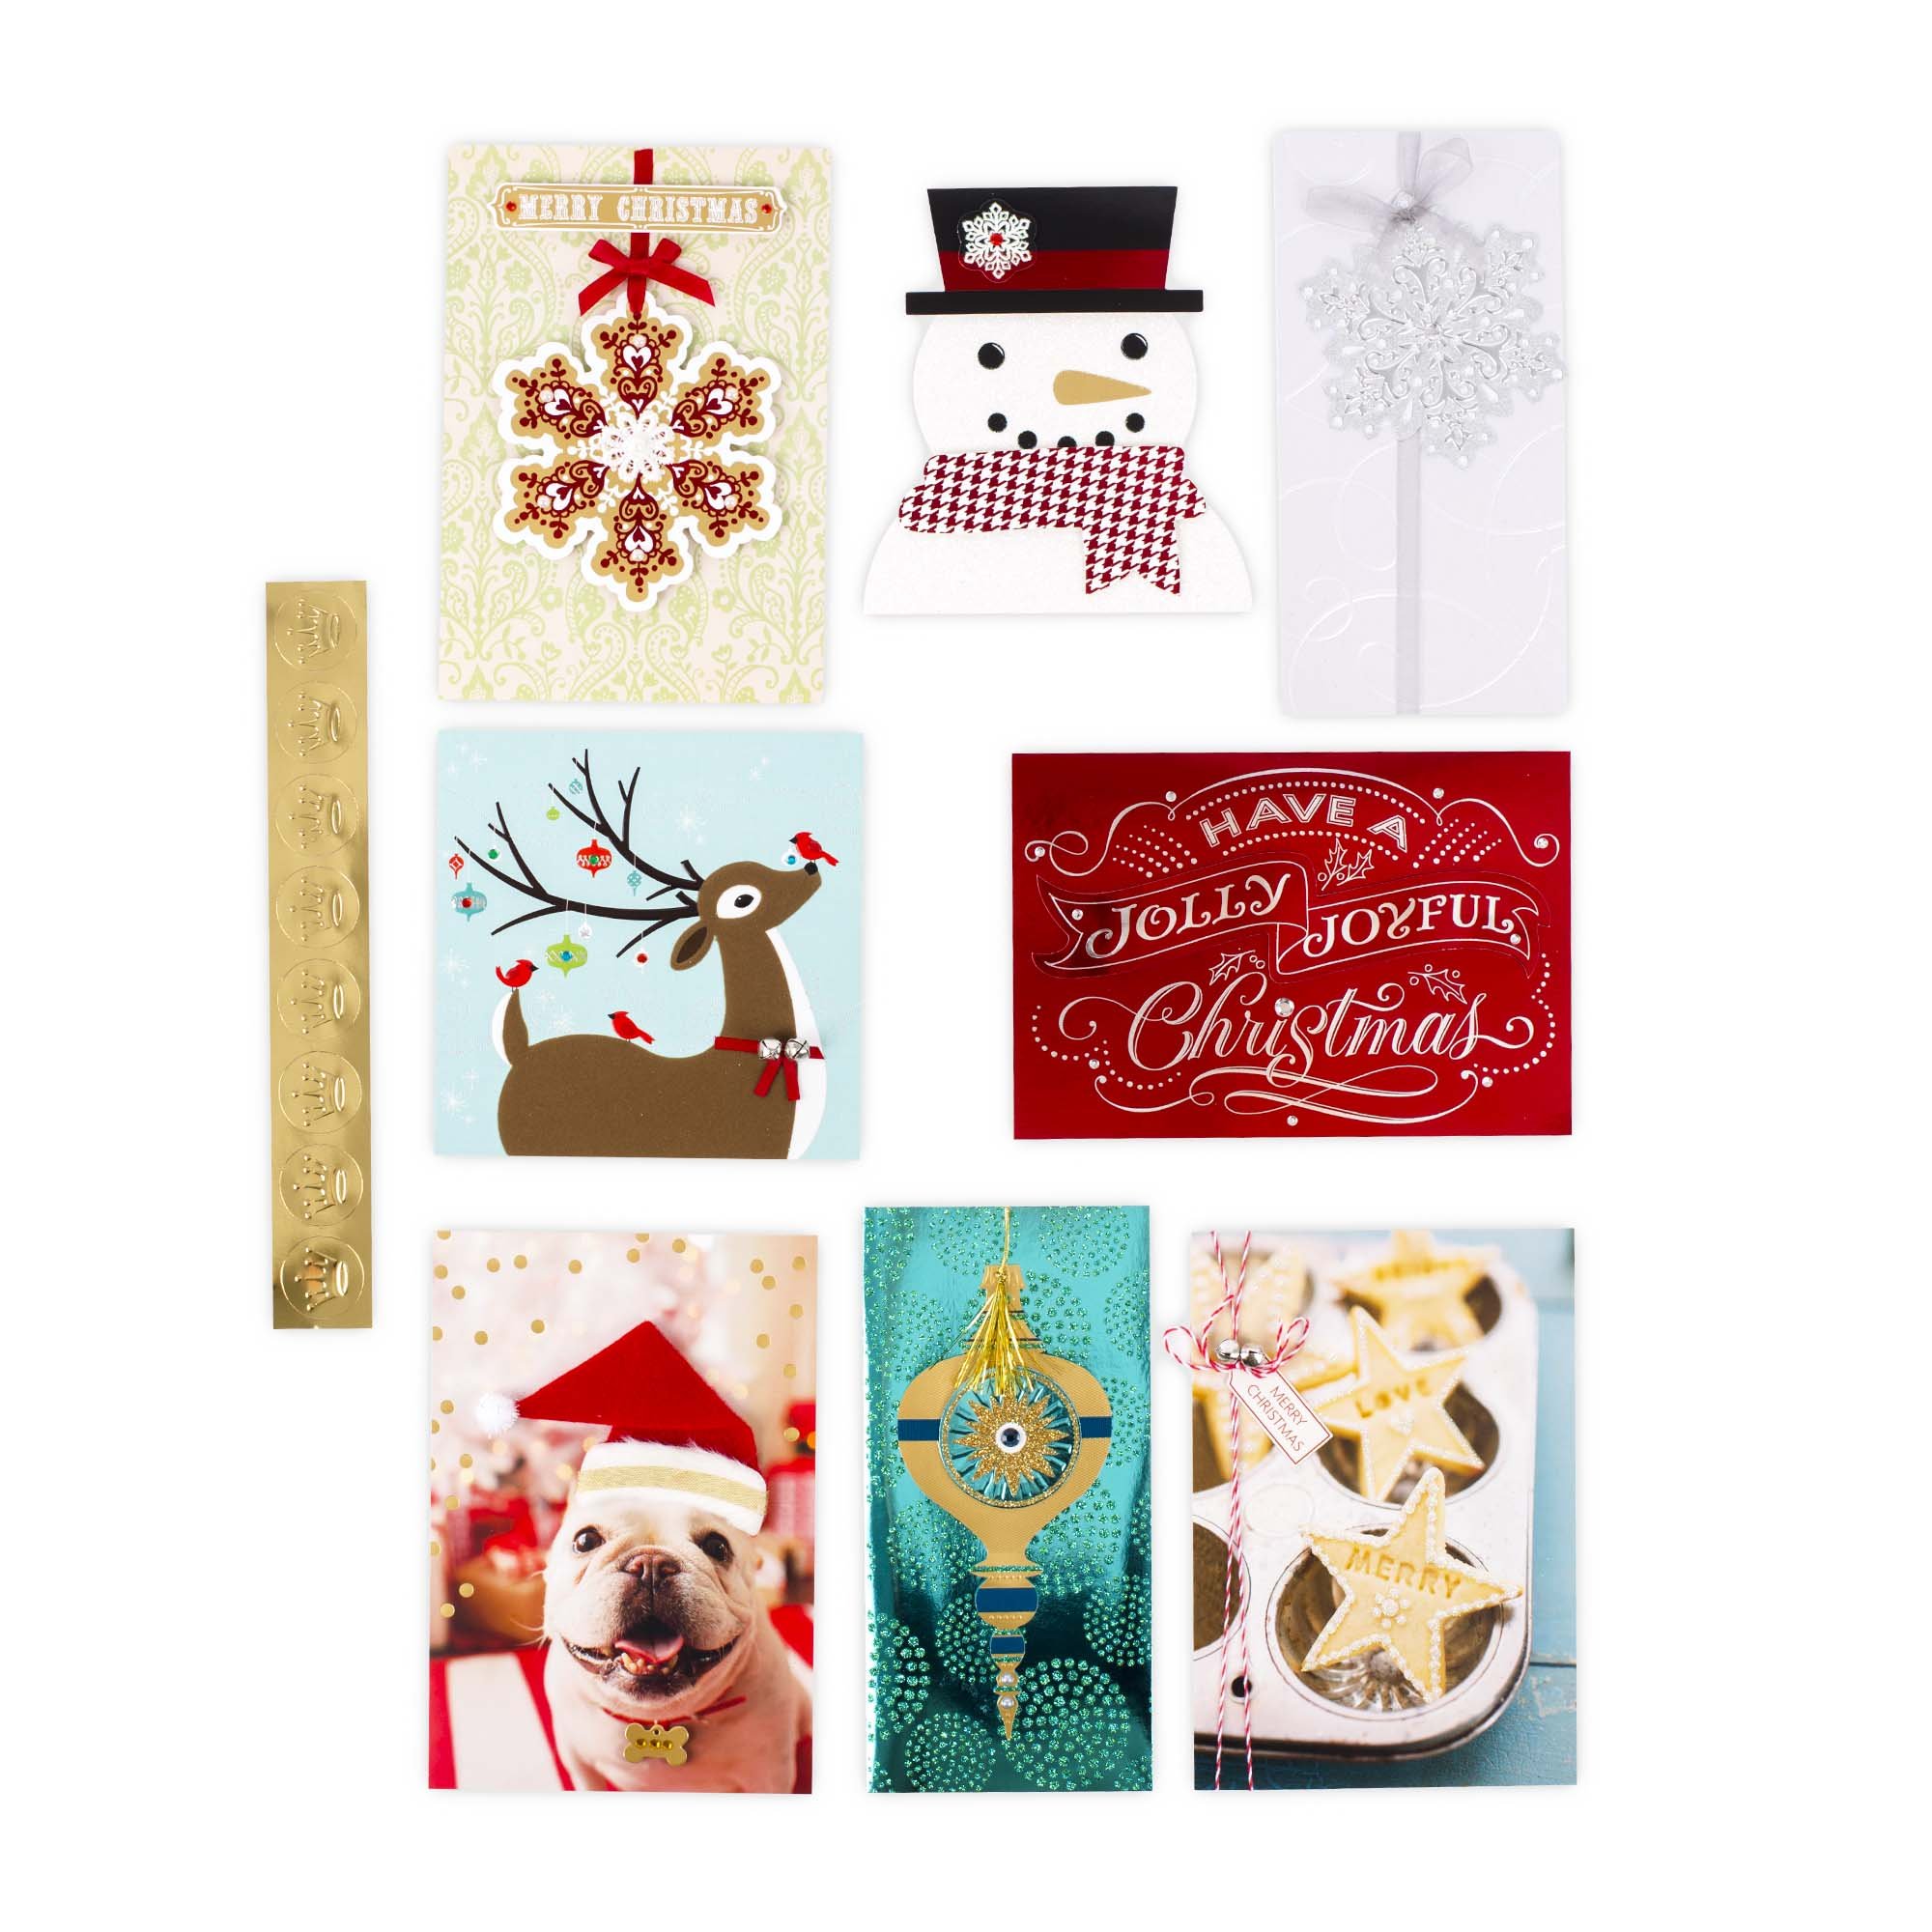 Hallmark Assorted Boxed Christmas Cards Set (Pack of 24 Handmade Holiday Cards with Envelopes)